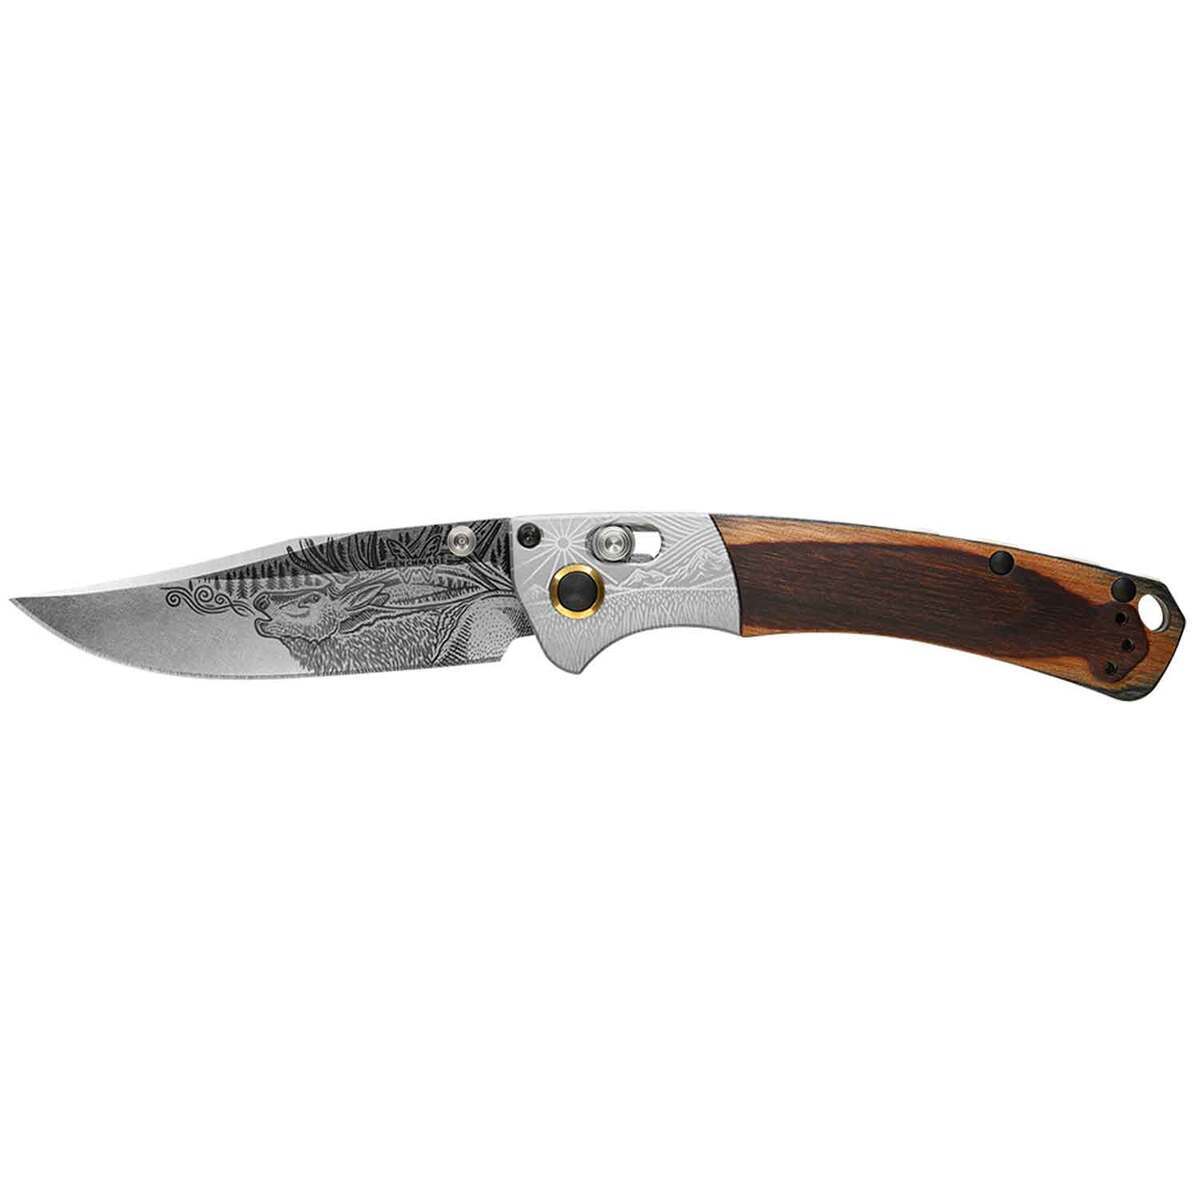 Benchmade 551 Camp Perry 2013 Limited Edition